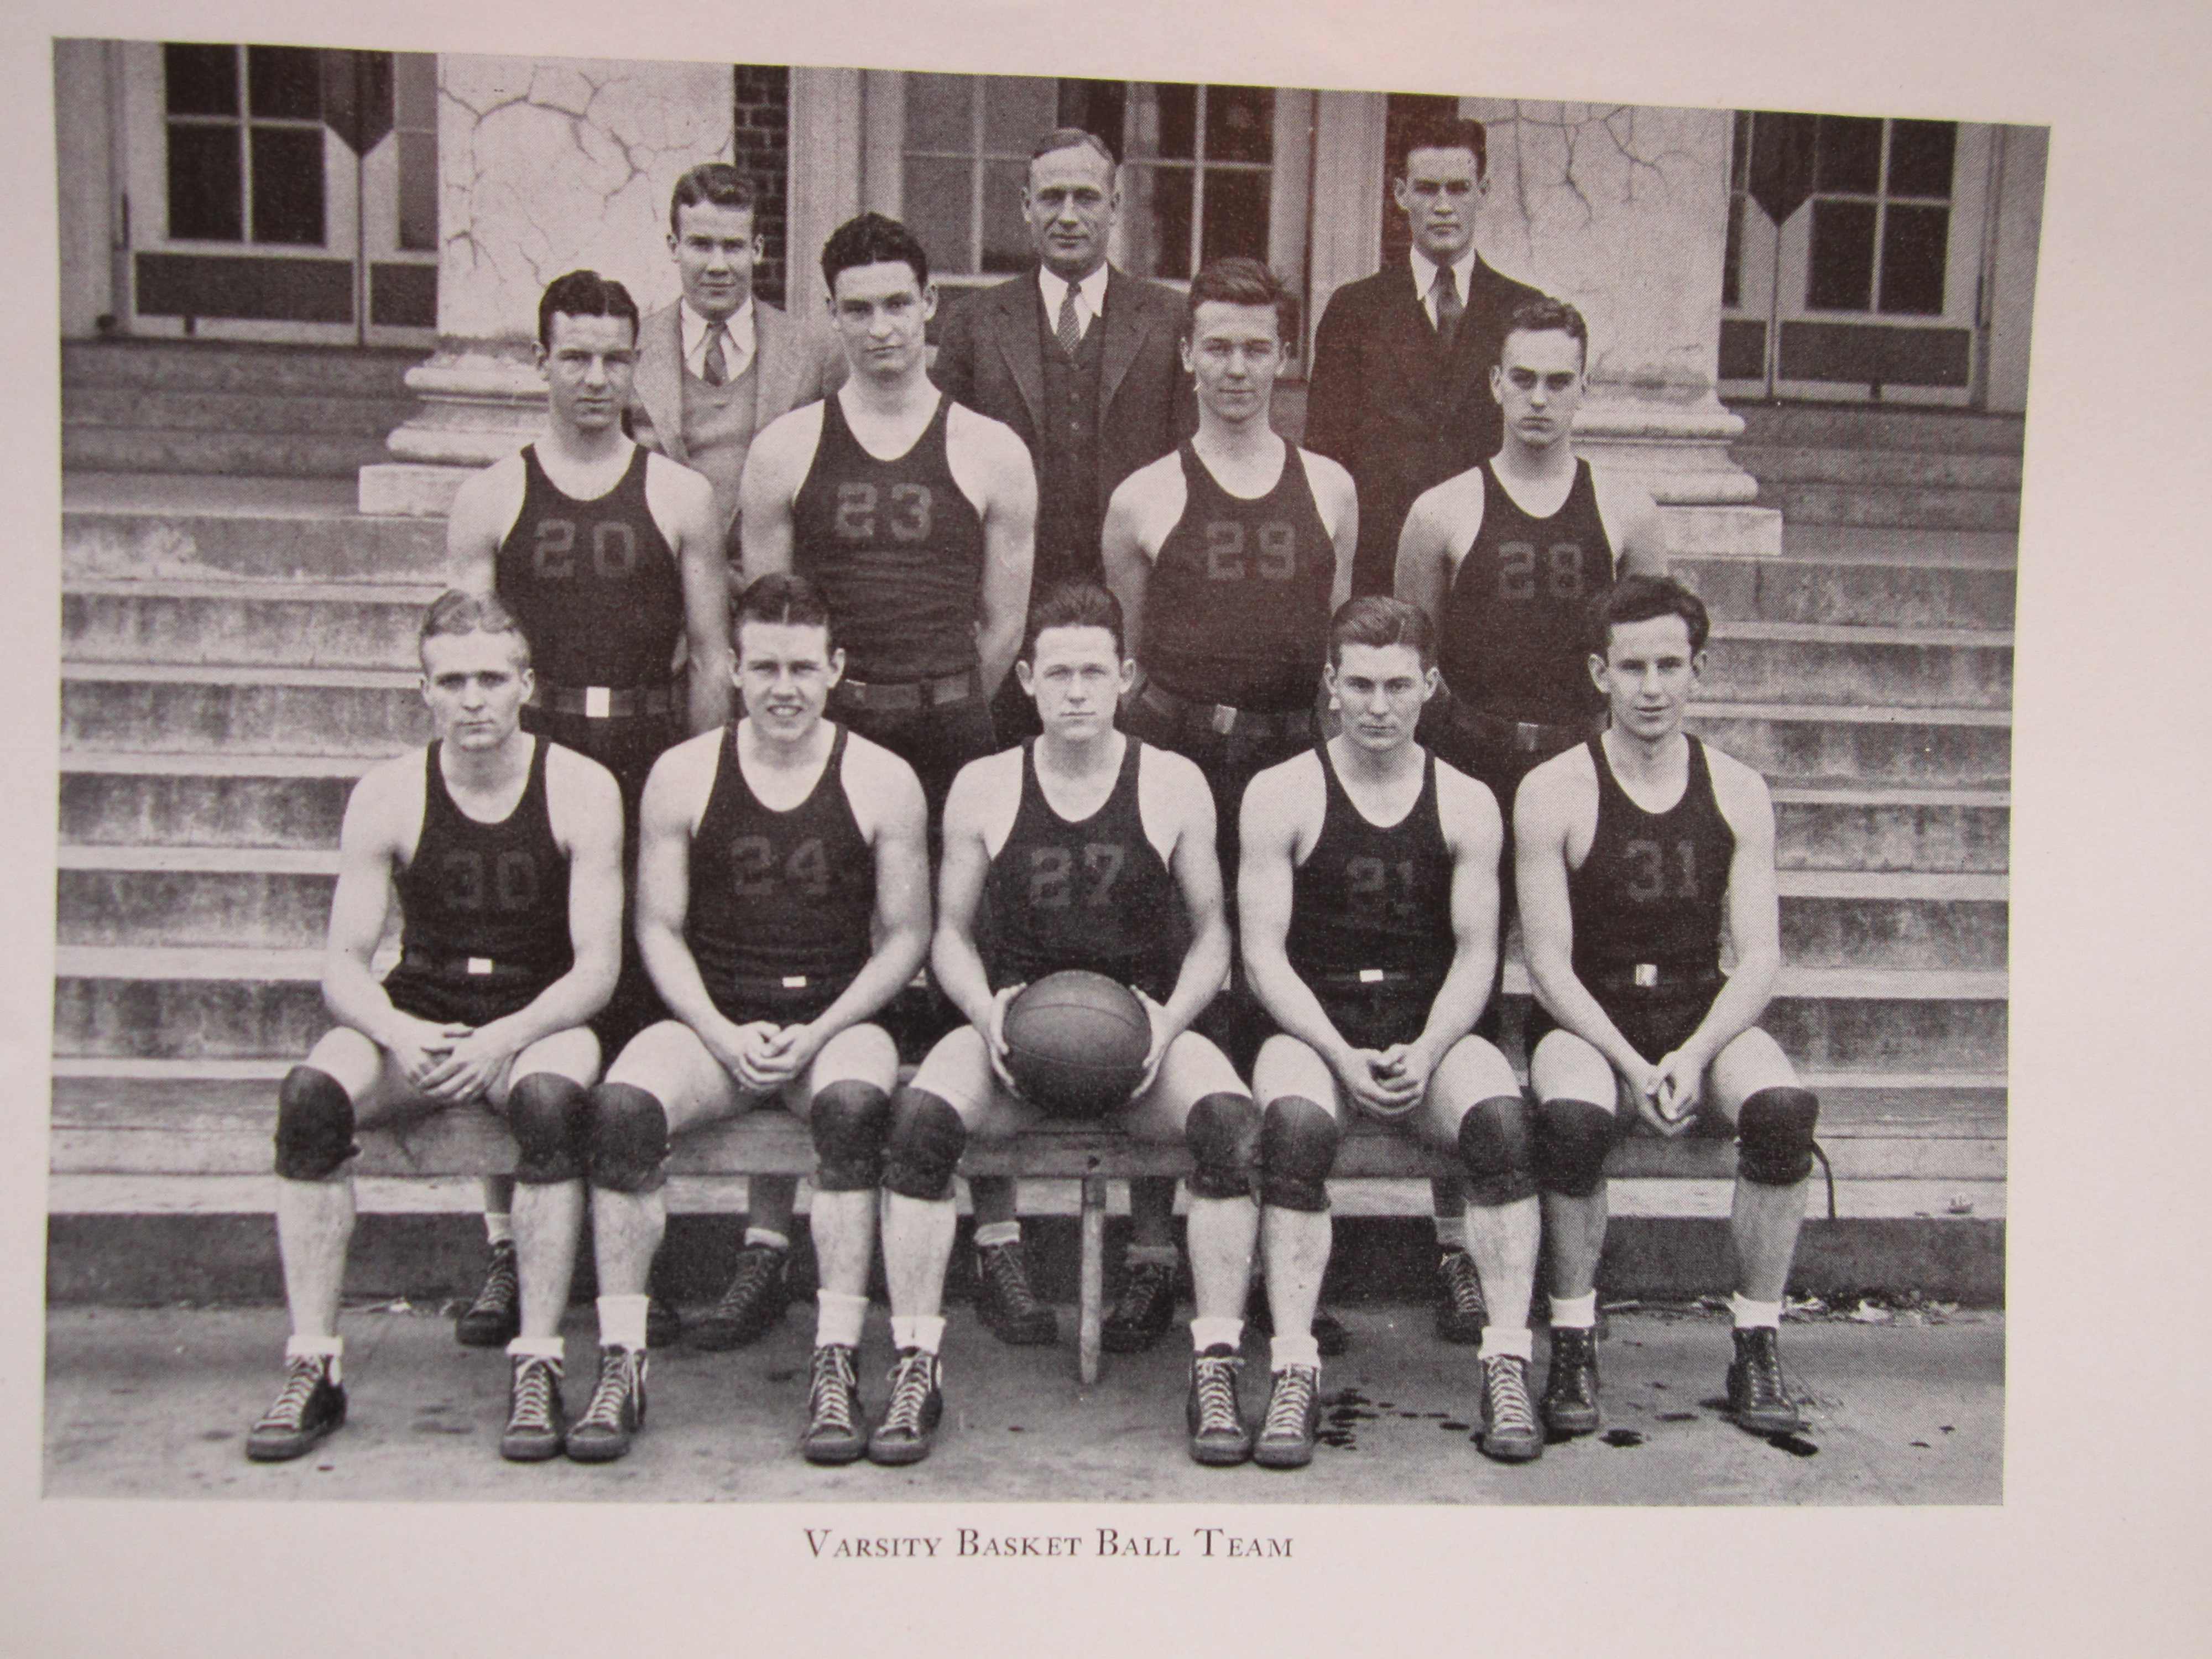 U.Va. Basketball Team from the 1934 Corks and Curls ()